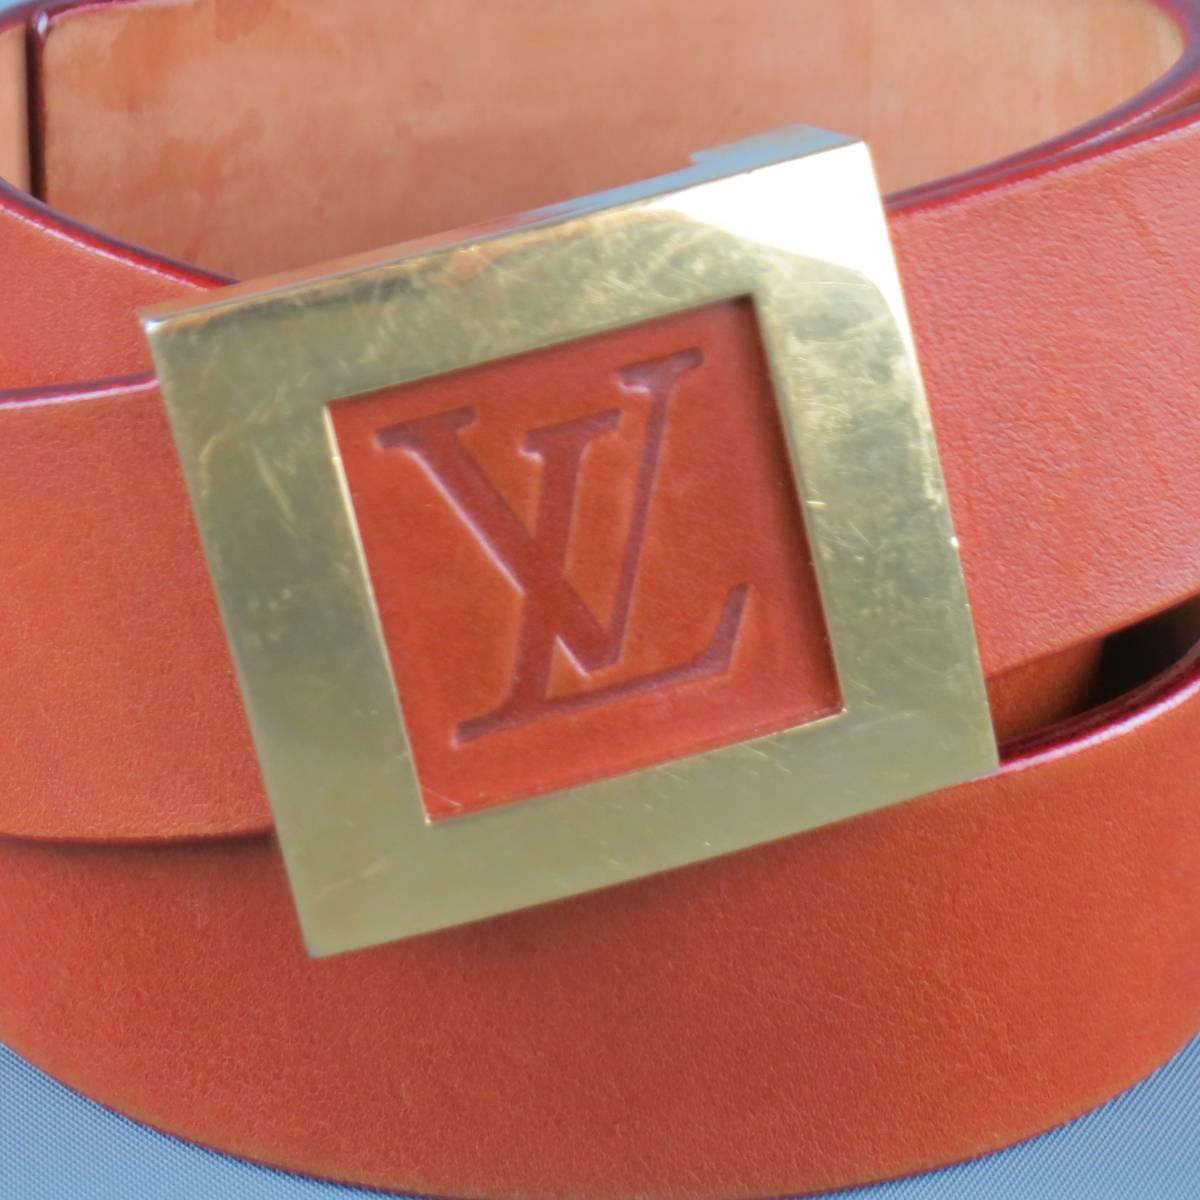 LOUIS VUITTON belt features a tan leather strap with gold tone brass square shaped buckle framing a LV embossed logo. Wear throughout. Made in France.
 
Fair Pre-Owned Condition.
Marked: 90/36
 
Length: 42 in.
Width: 3 cm.
Fits: 34-38 in.
Buckle: